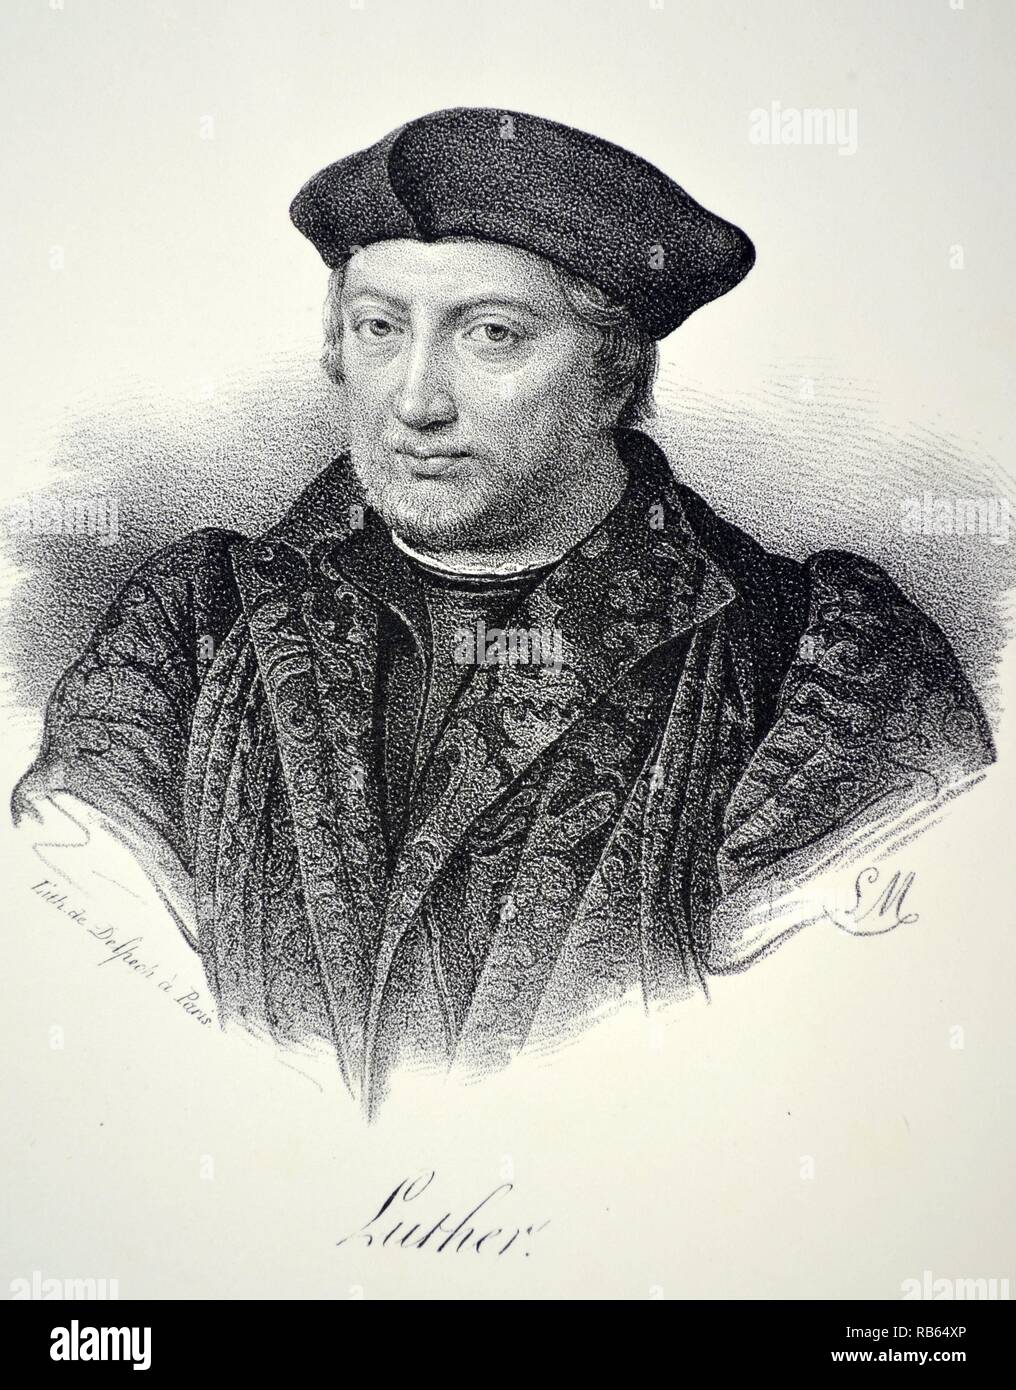 Martin Luther (1483-1546) German monk and theologian. A leader of the Protestant Reformation. Lithograph, Paris, c1840. Stock Photo